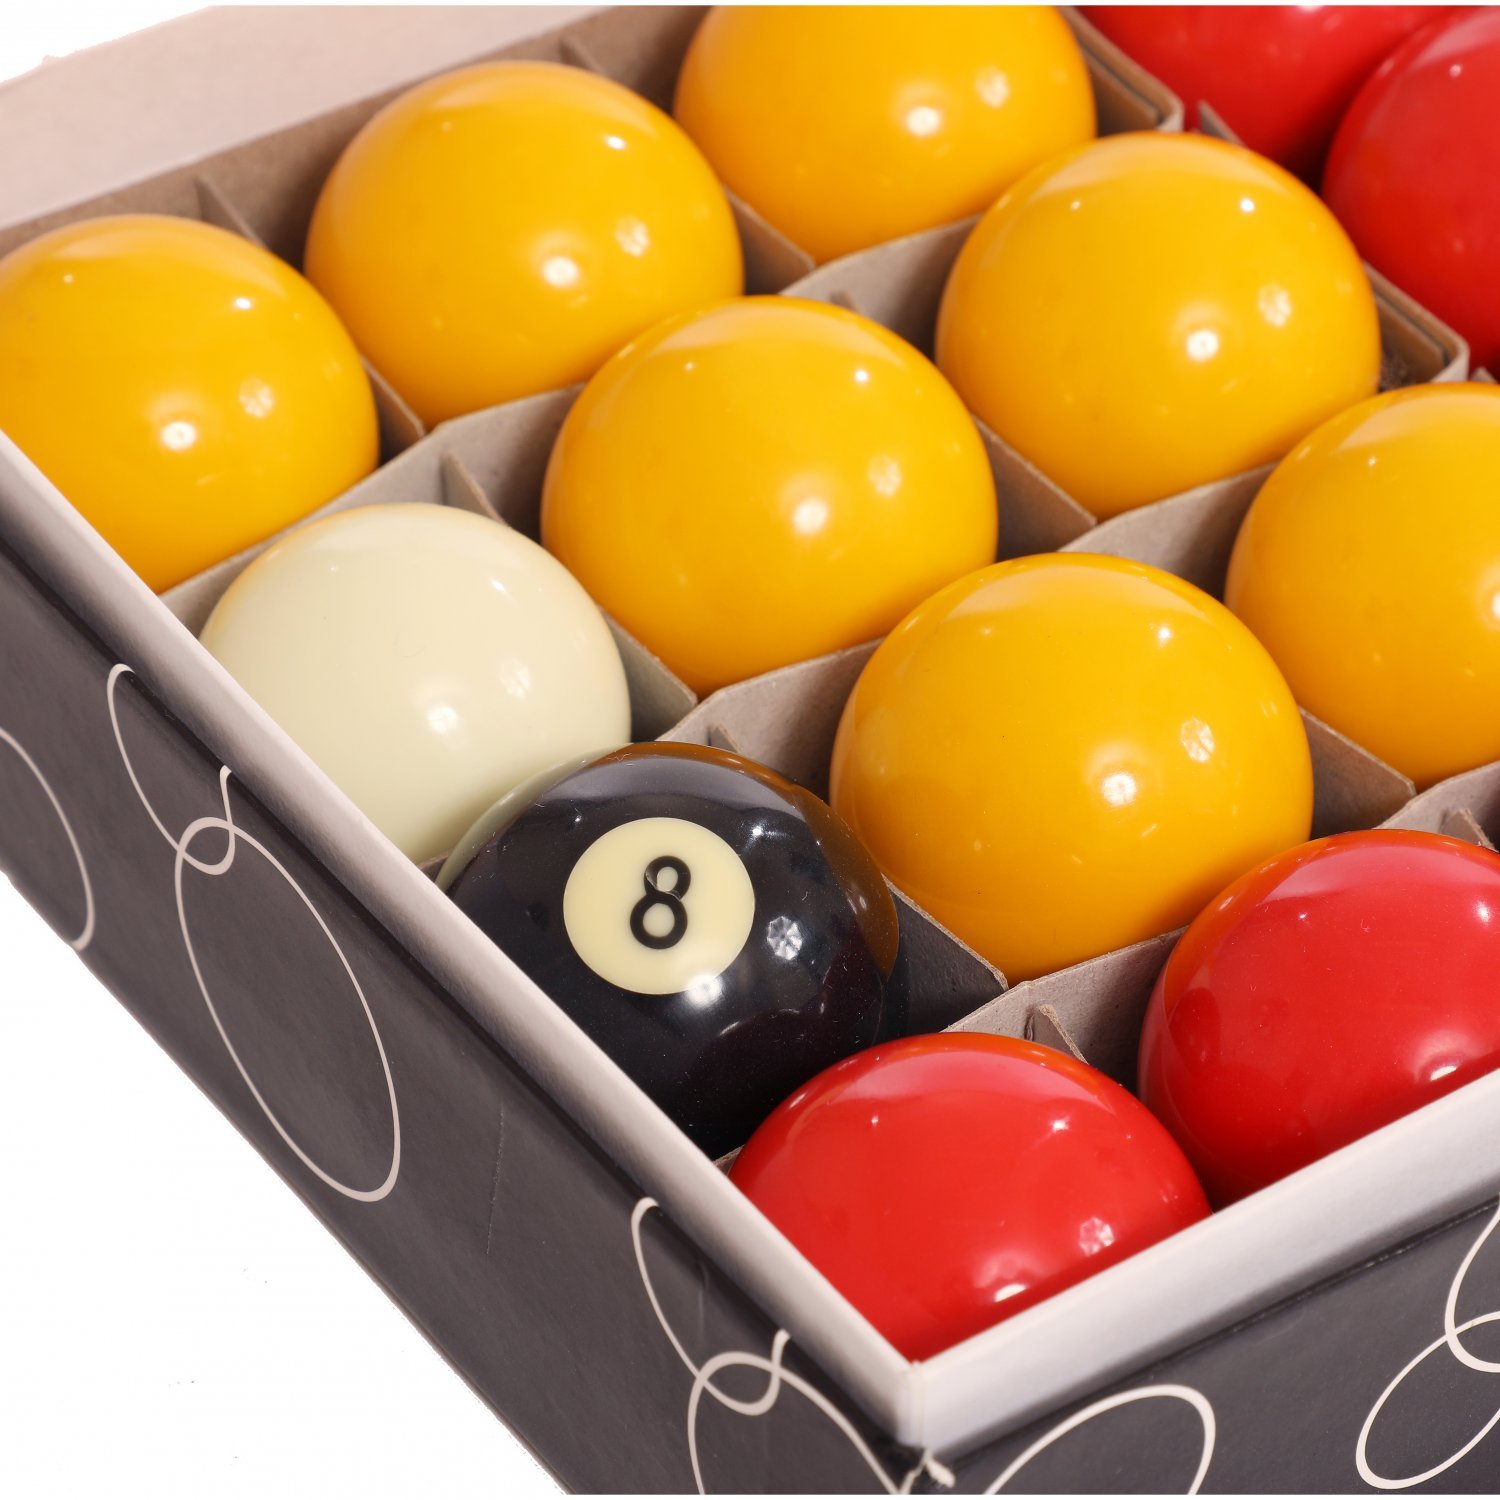 A great value, good quality, affordable red and yellow 2" pool ball se...